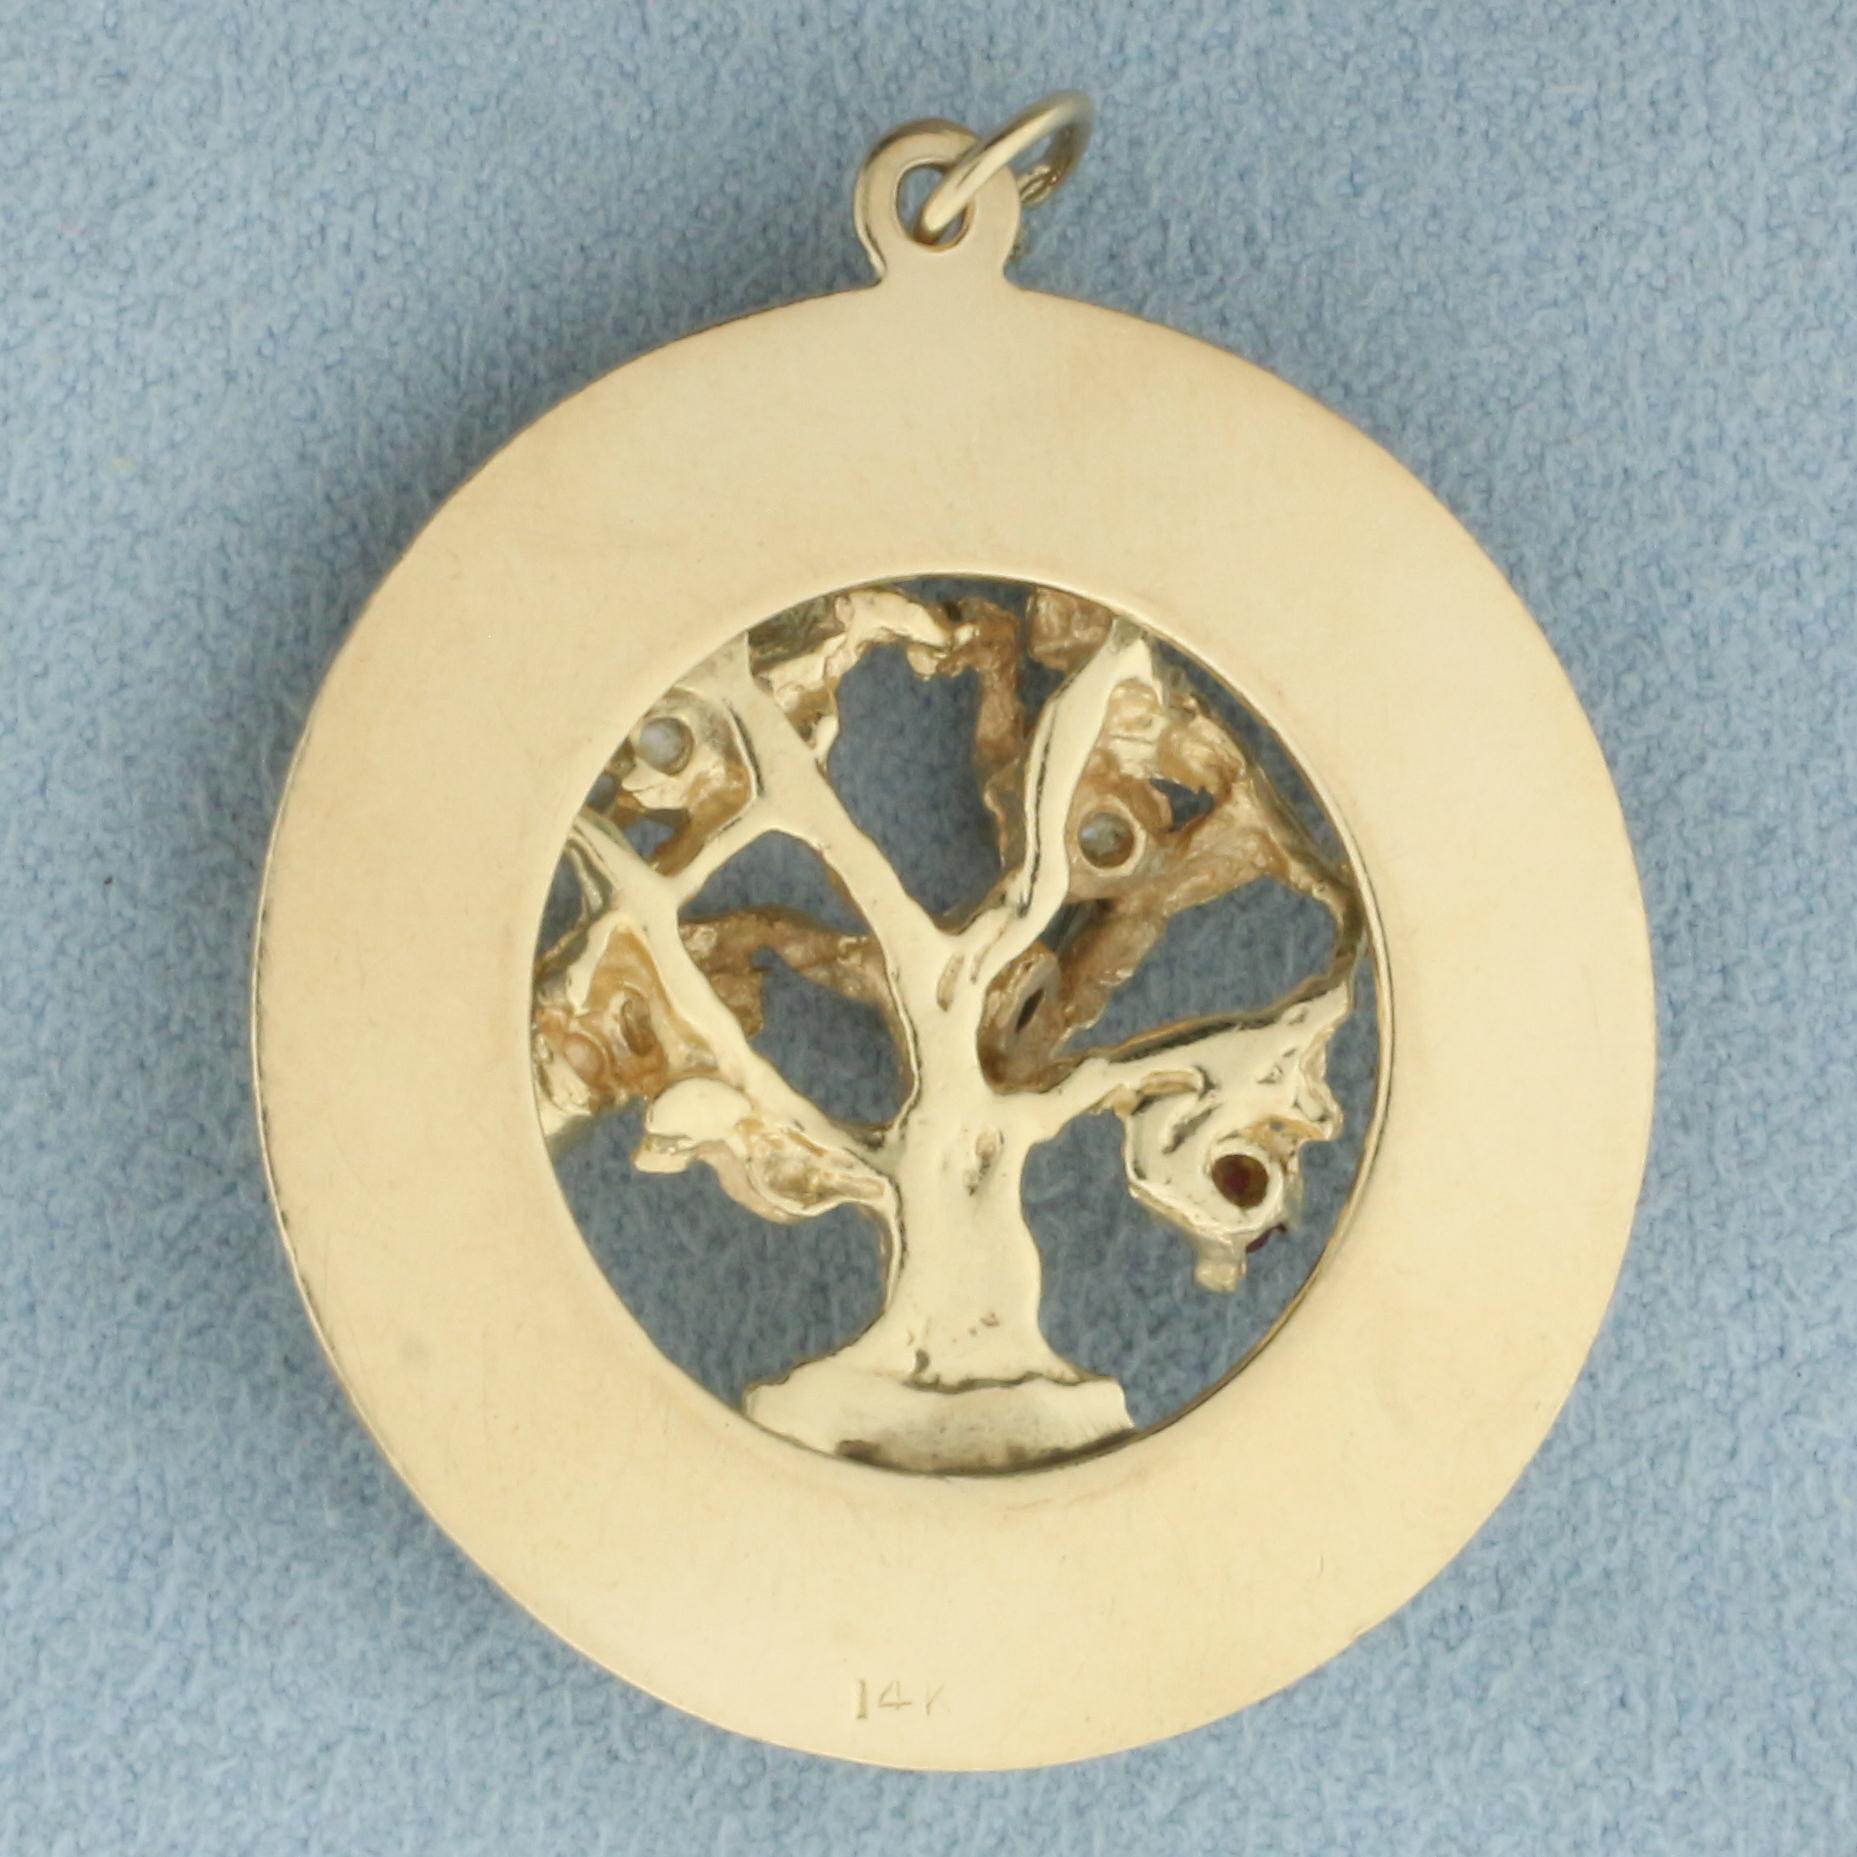 Gemstone Tree Of Life Medallion Pendant Or Charm In 14k Yellow Gold